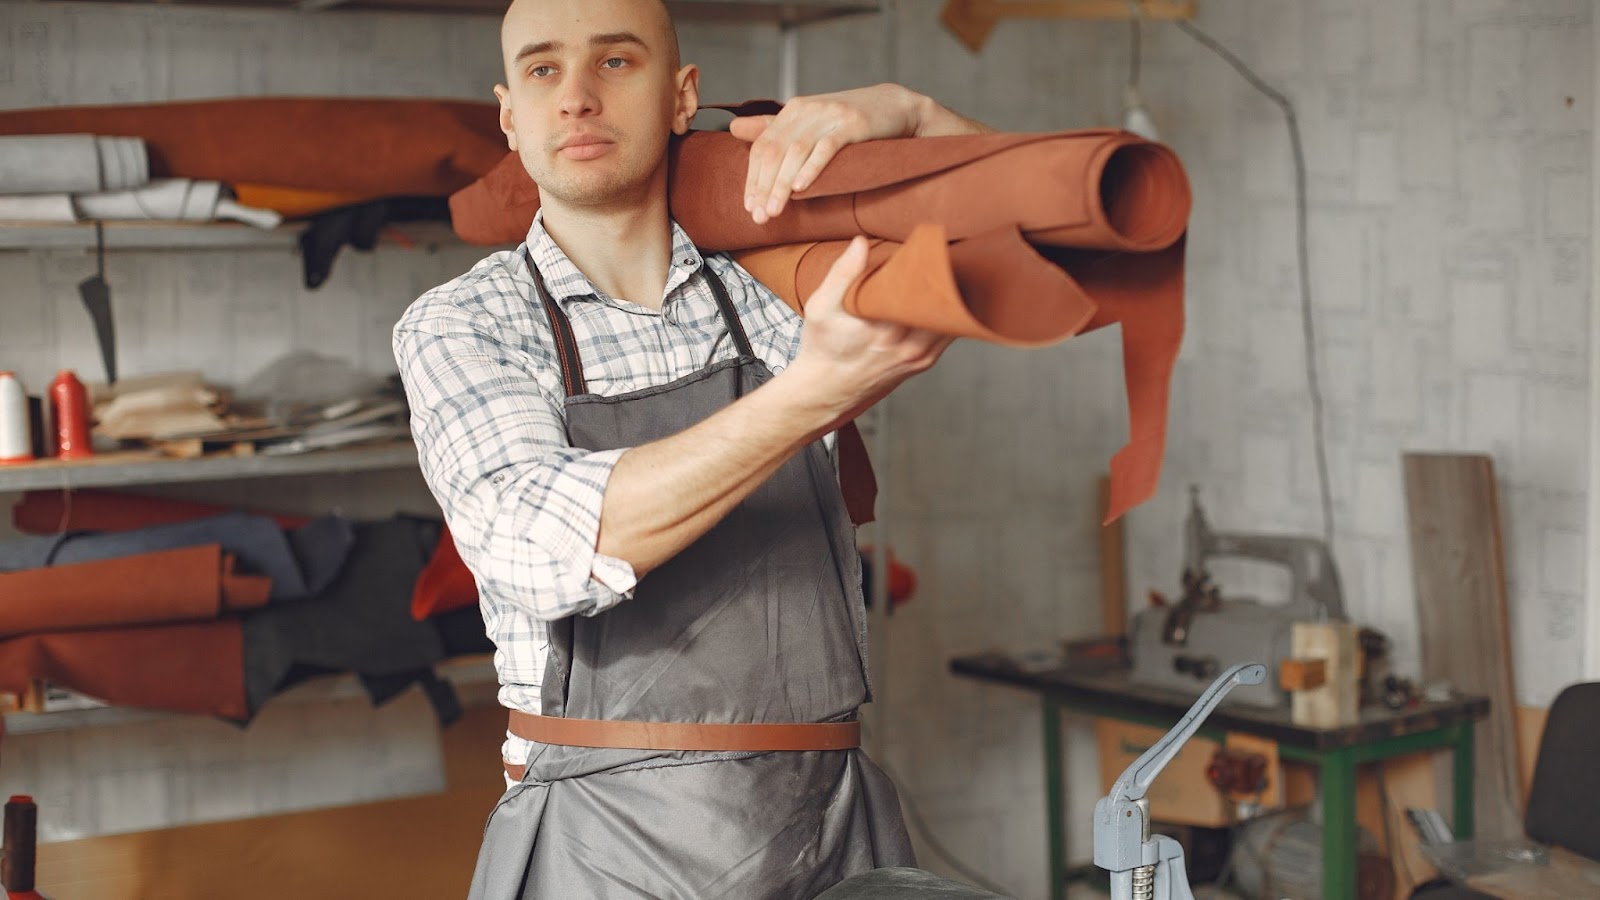 How Does the Design of Leather Aprons Cater to Different Occupational Needs